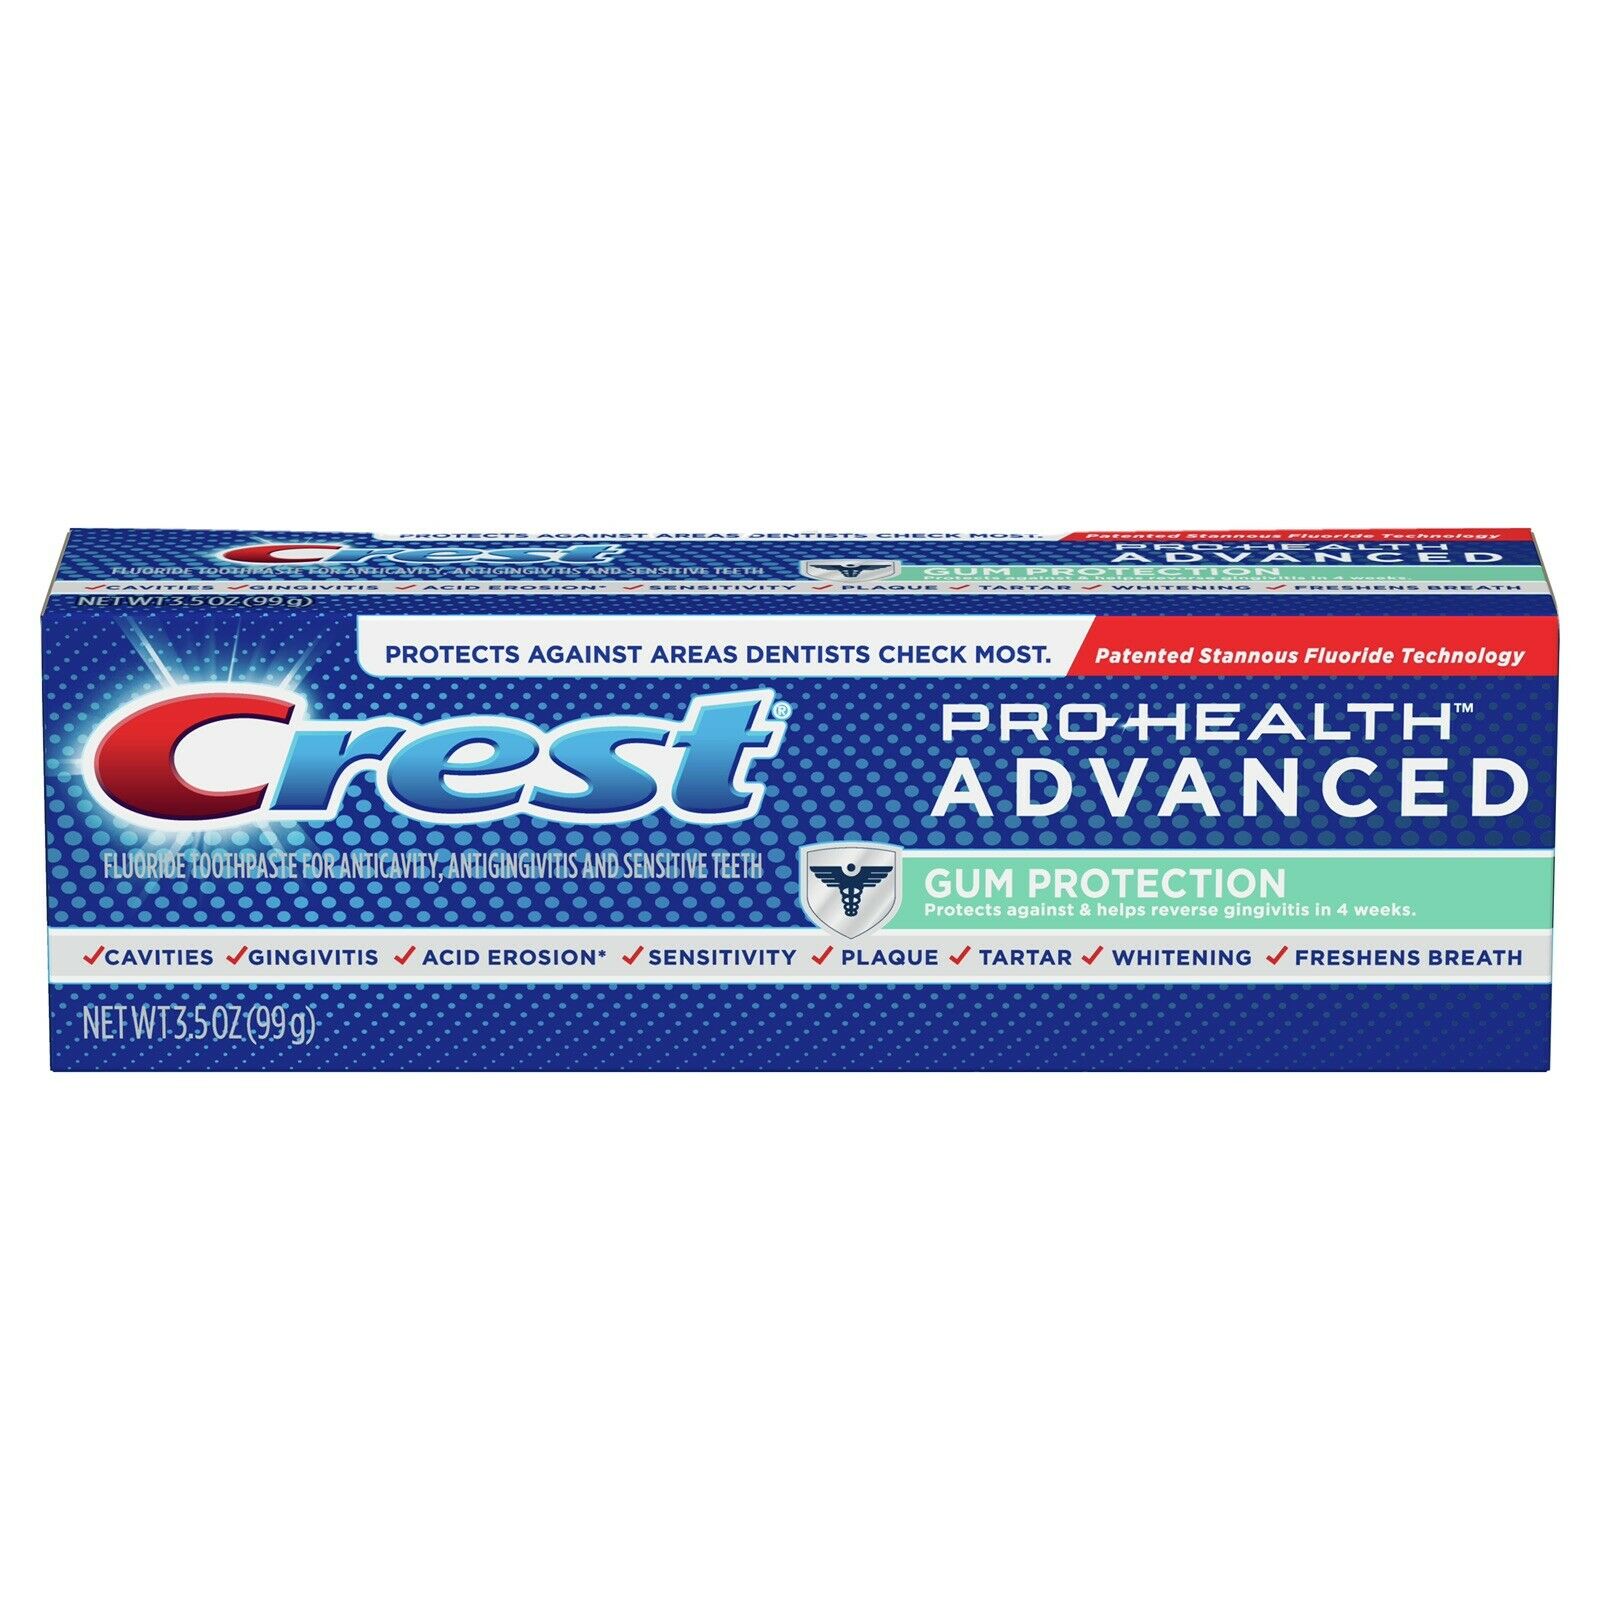 NEW Crest Pro Health Advanced Gum Protection Toothpaste 3.5oz